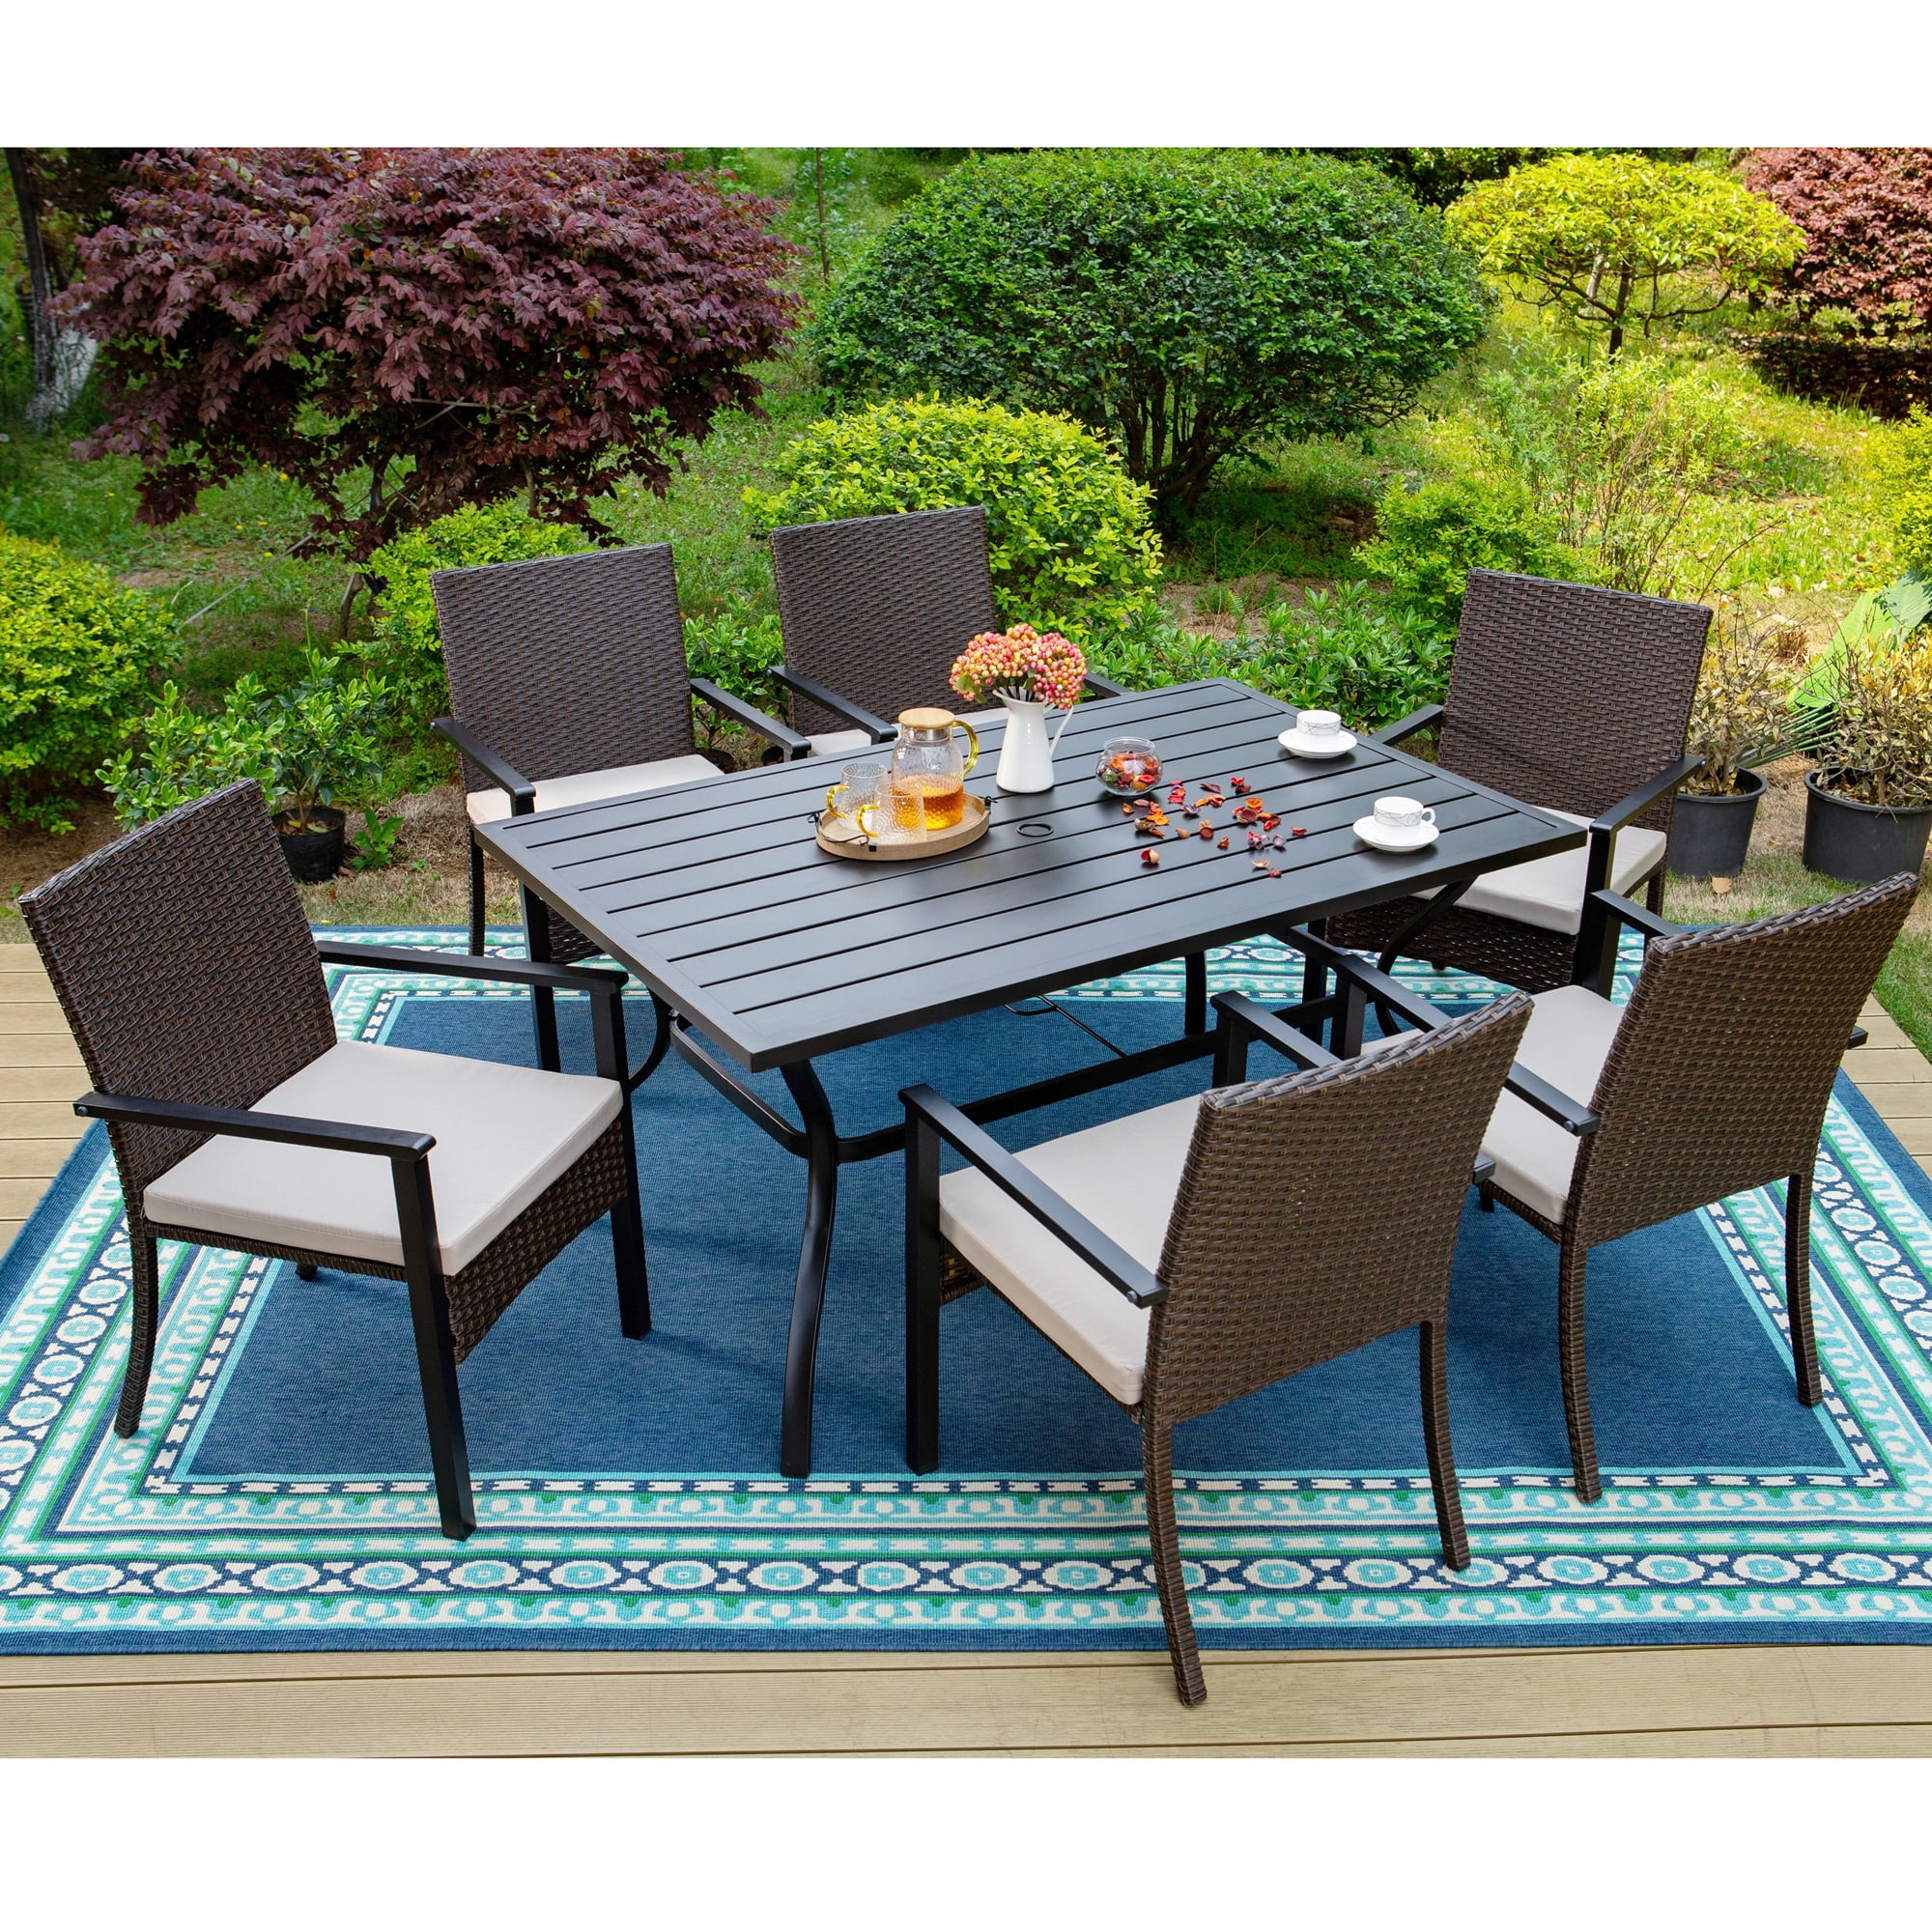 Is This the Perfect 5 Piece Patio Set Under $600: Why the Montclair Collection is Your Best Choice for Outdoor Dining